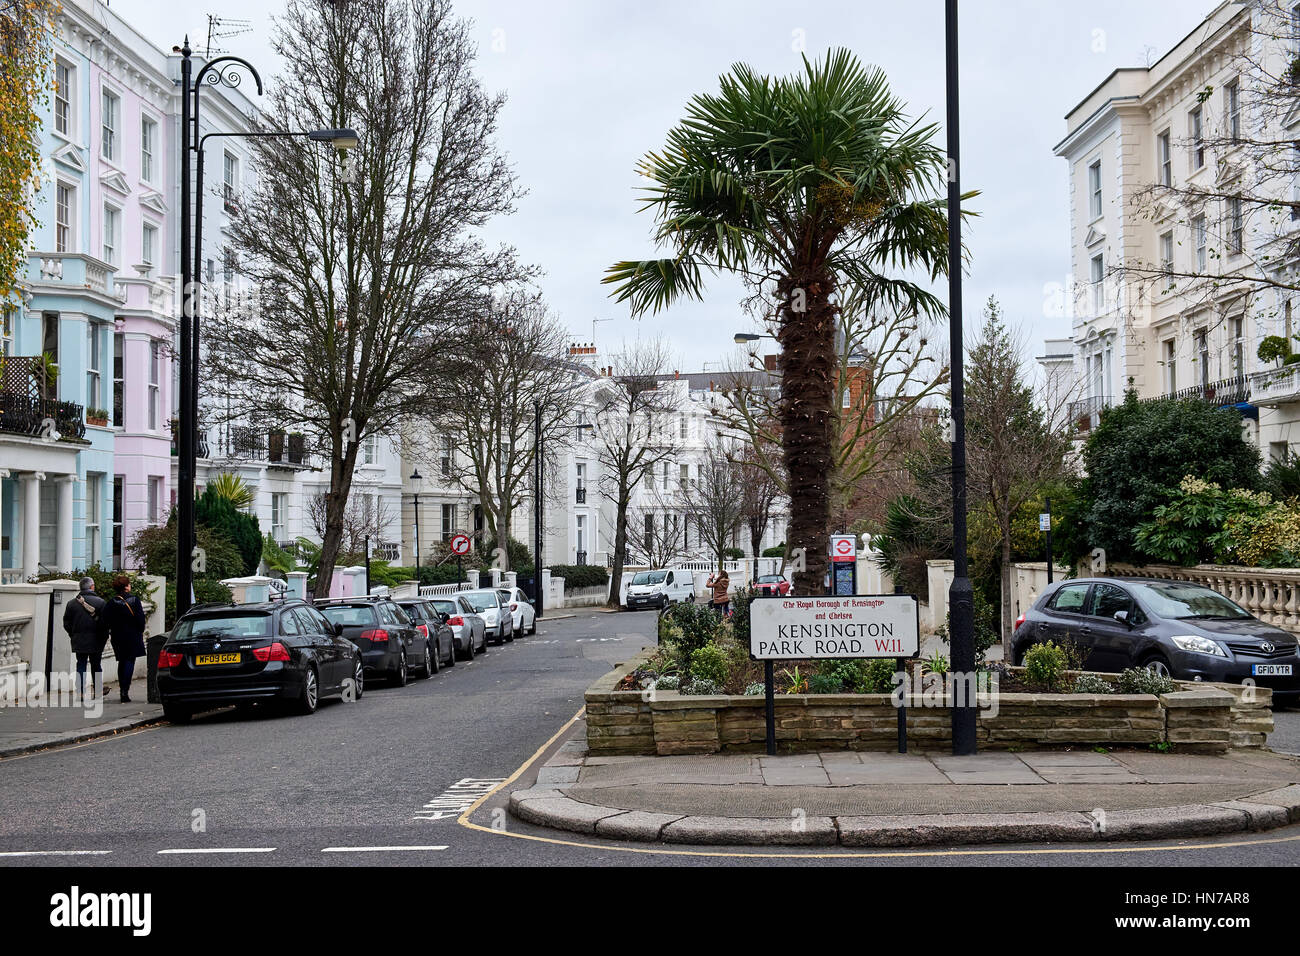 LONDON CITY - DECEMBER 25, 2016: Typical pastel colored houses in Notting hill surrounding a small square with palm trees Stock Photo